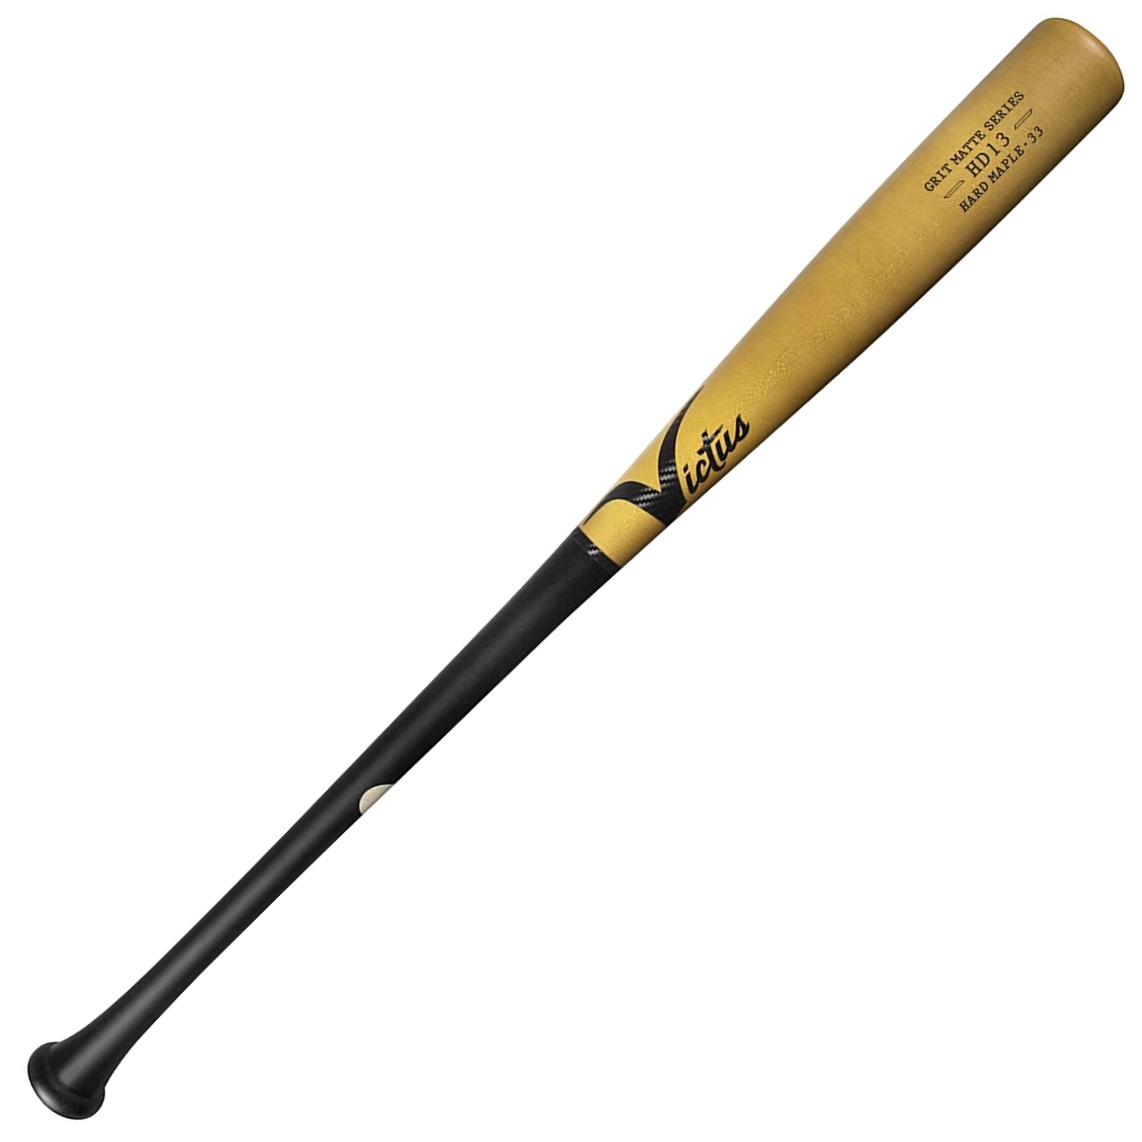 victus-hd13-maple-grit-matte-black-sand-wood-baseball-bat-33-inch VMRWHDH13-BKSD-33 Victus  The HD13 Pro Reserve is essentially an I13 with incredible pop